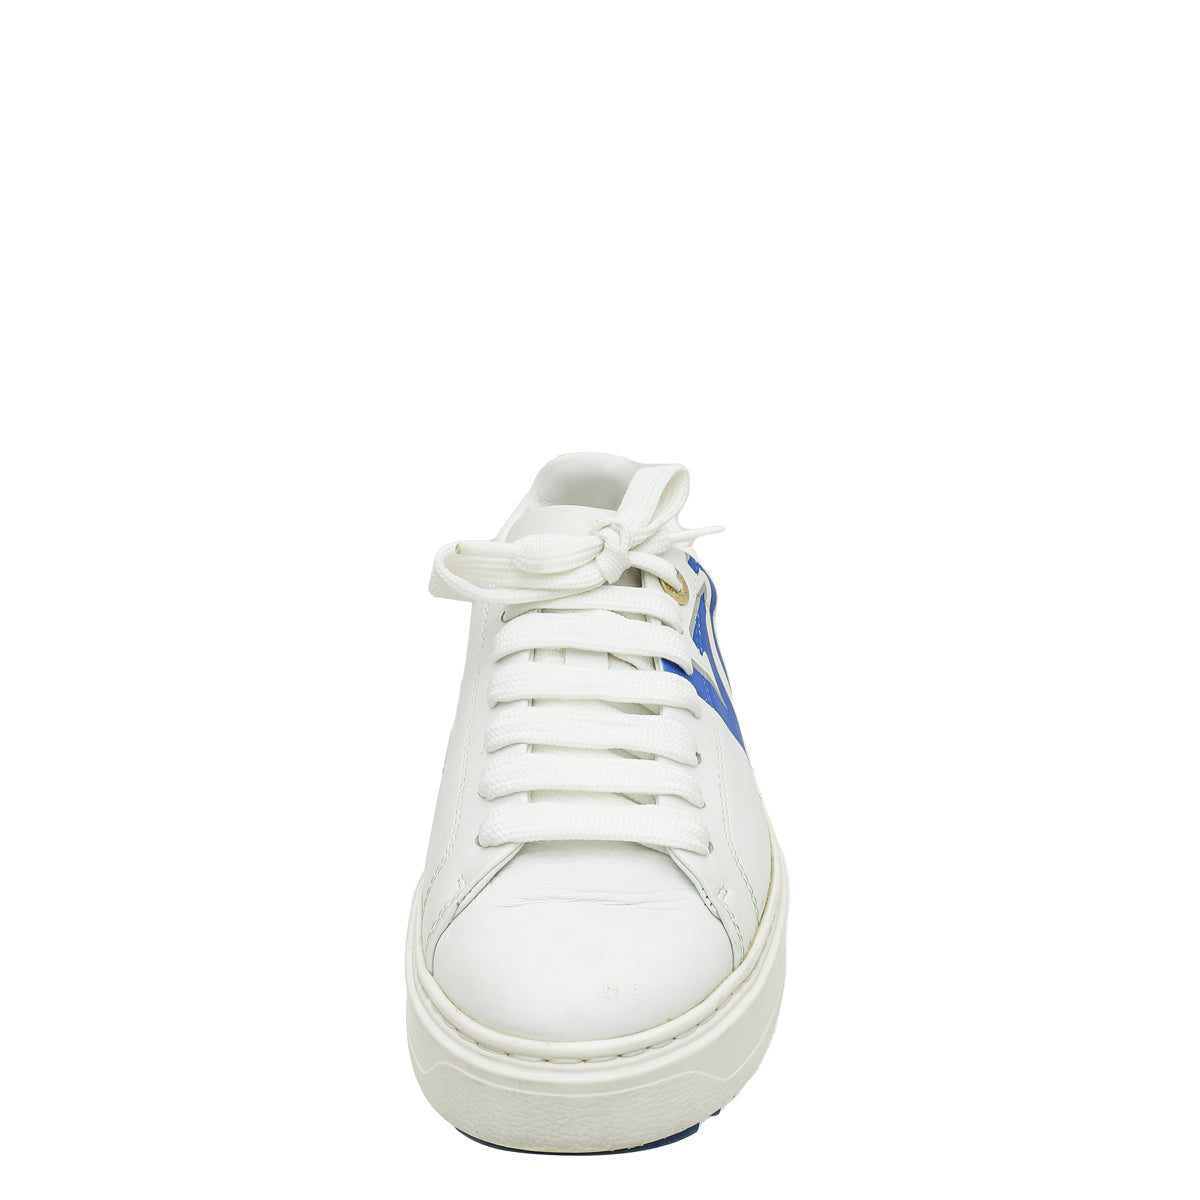 LOUIS VUITTON Monogram Time Out Sneakers 35.5 Blue 640944